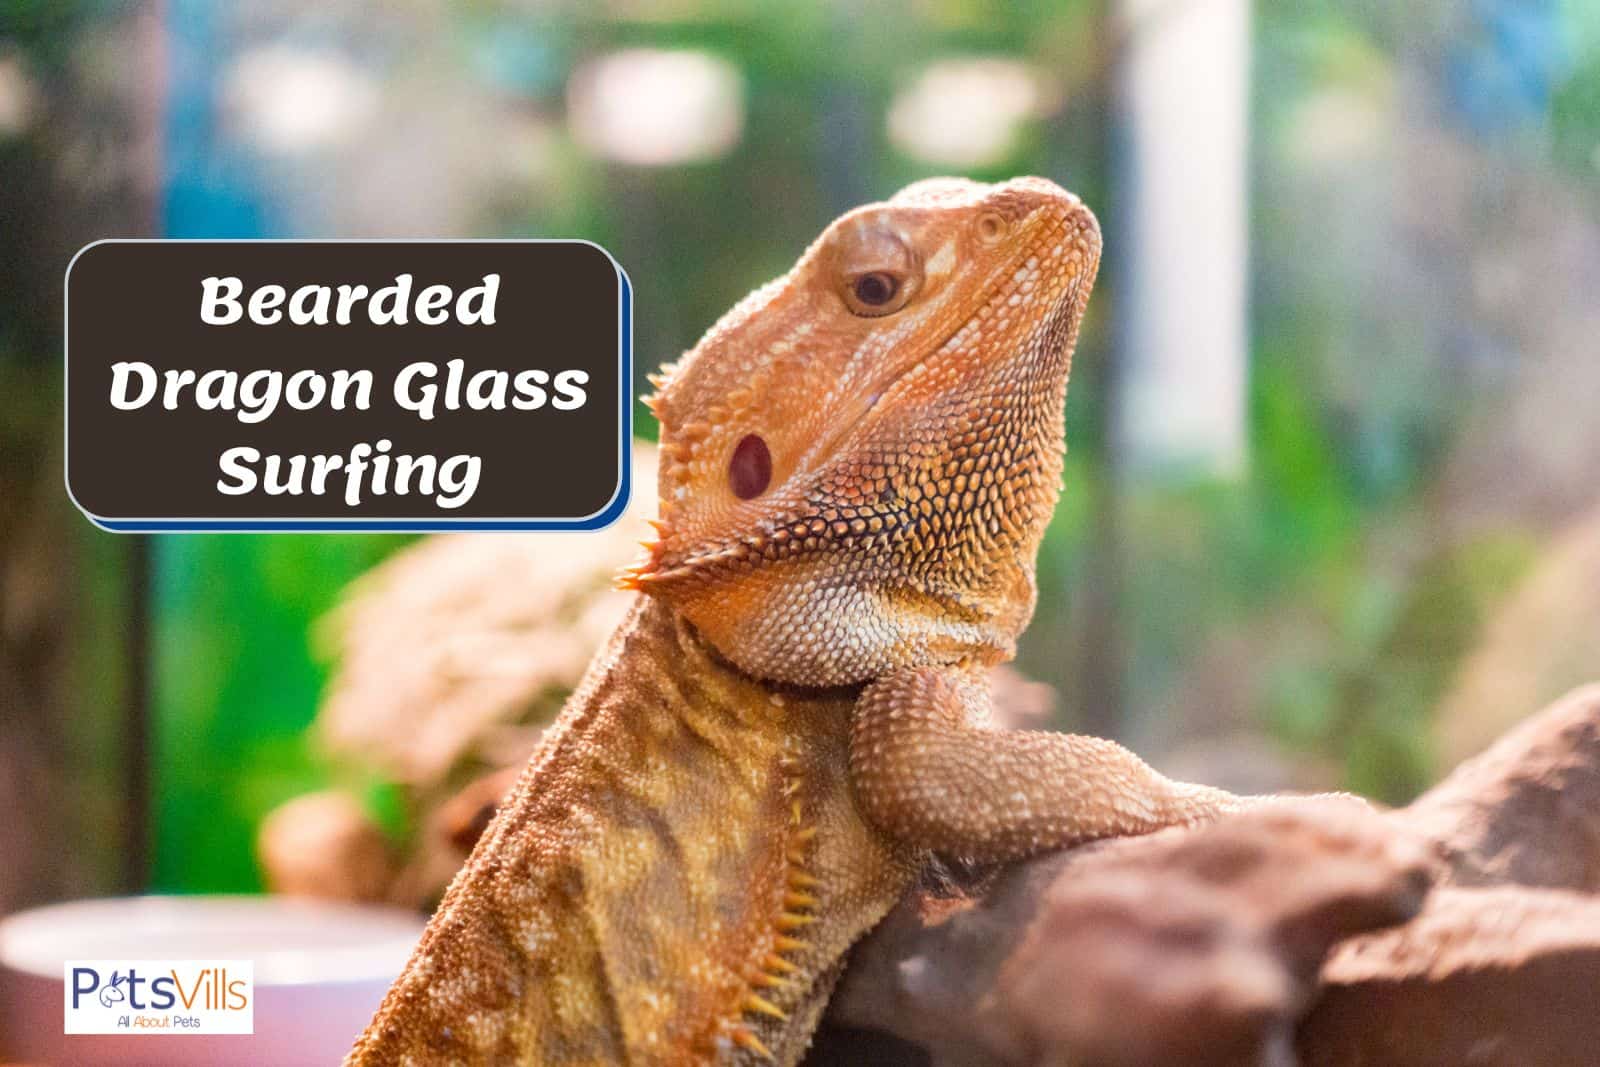 Bearded is doing Dragon Glass Surfing